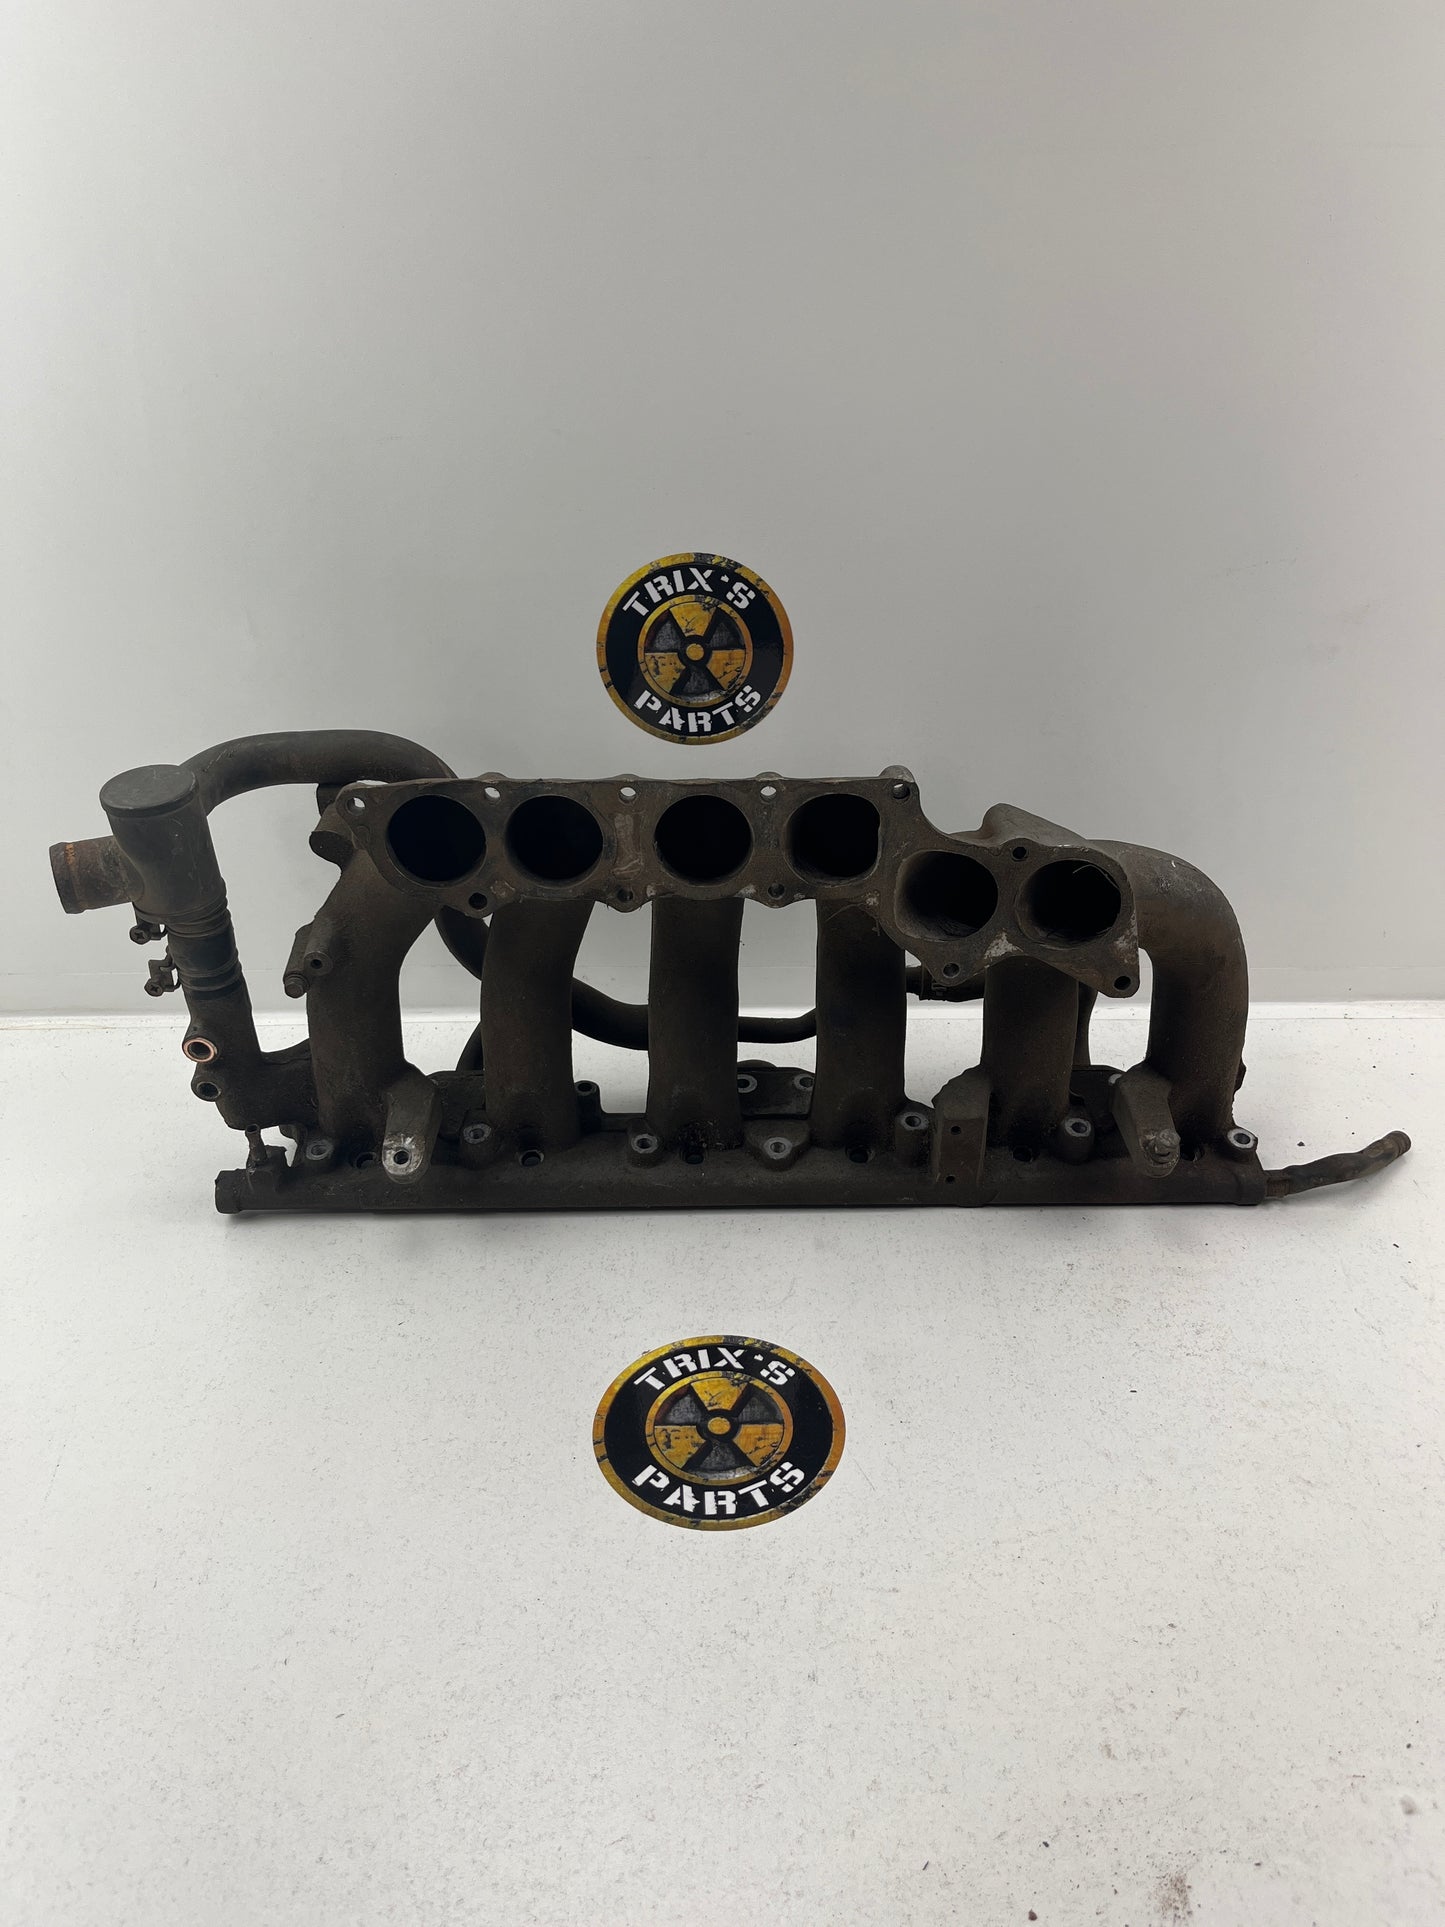 Used Bottom Bare Intake Manifold to Suit RB20DET and RB20DE Engines